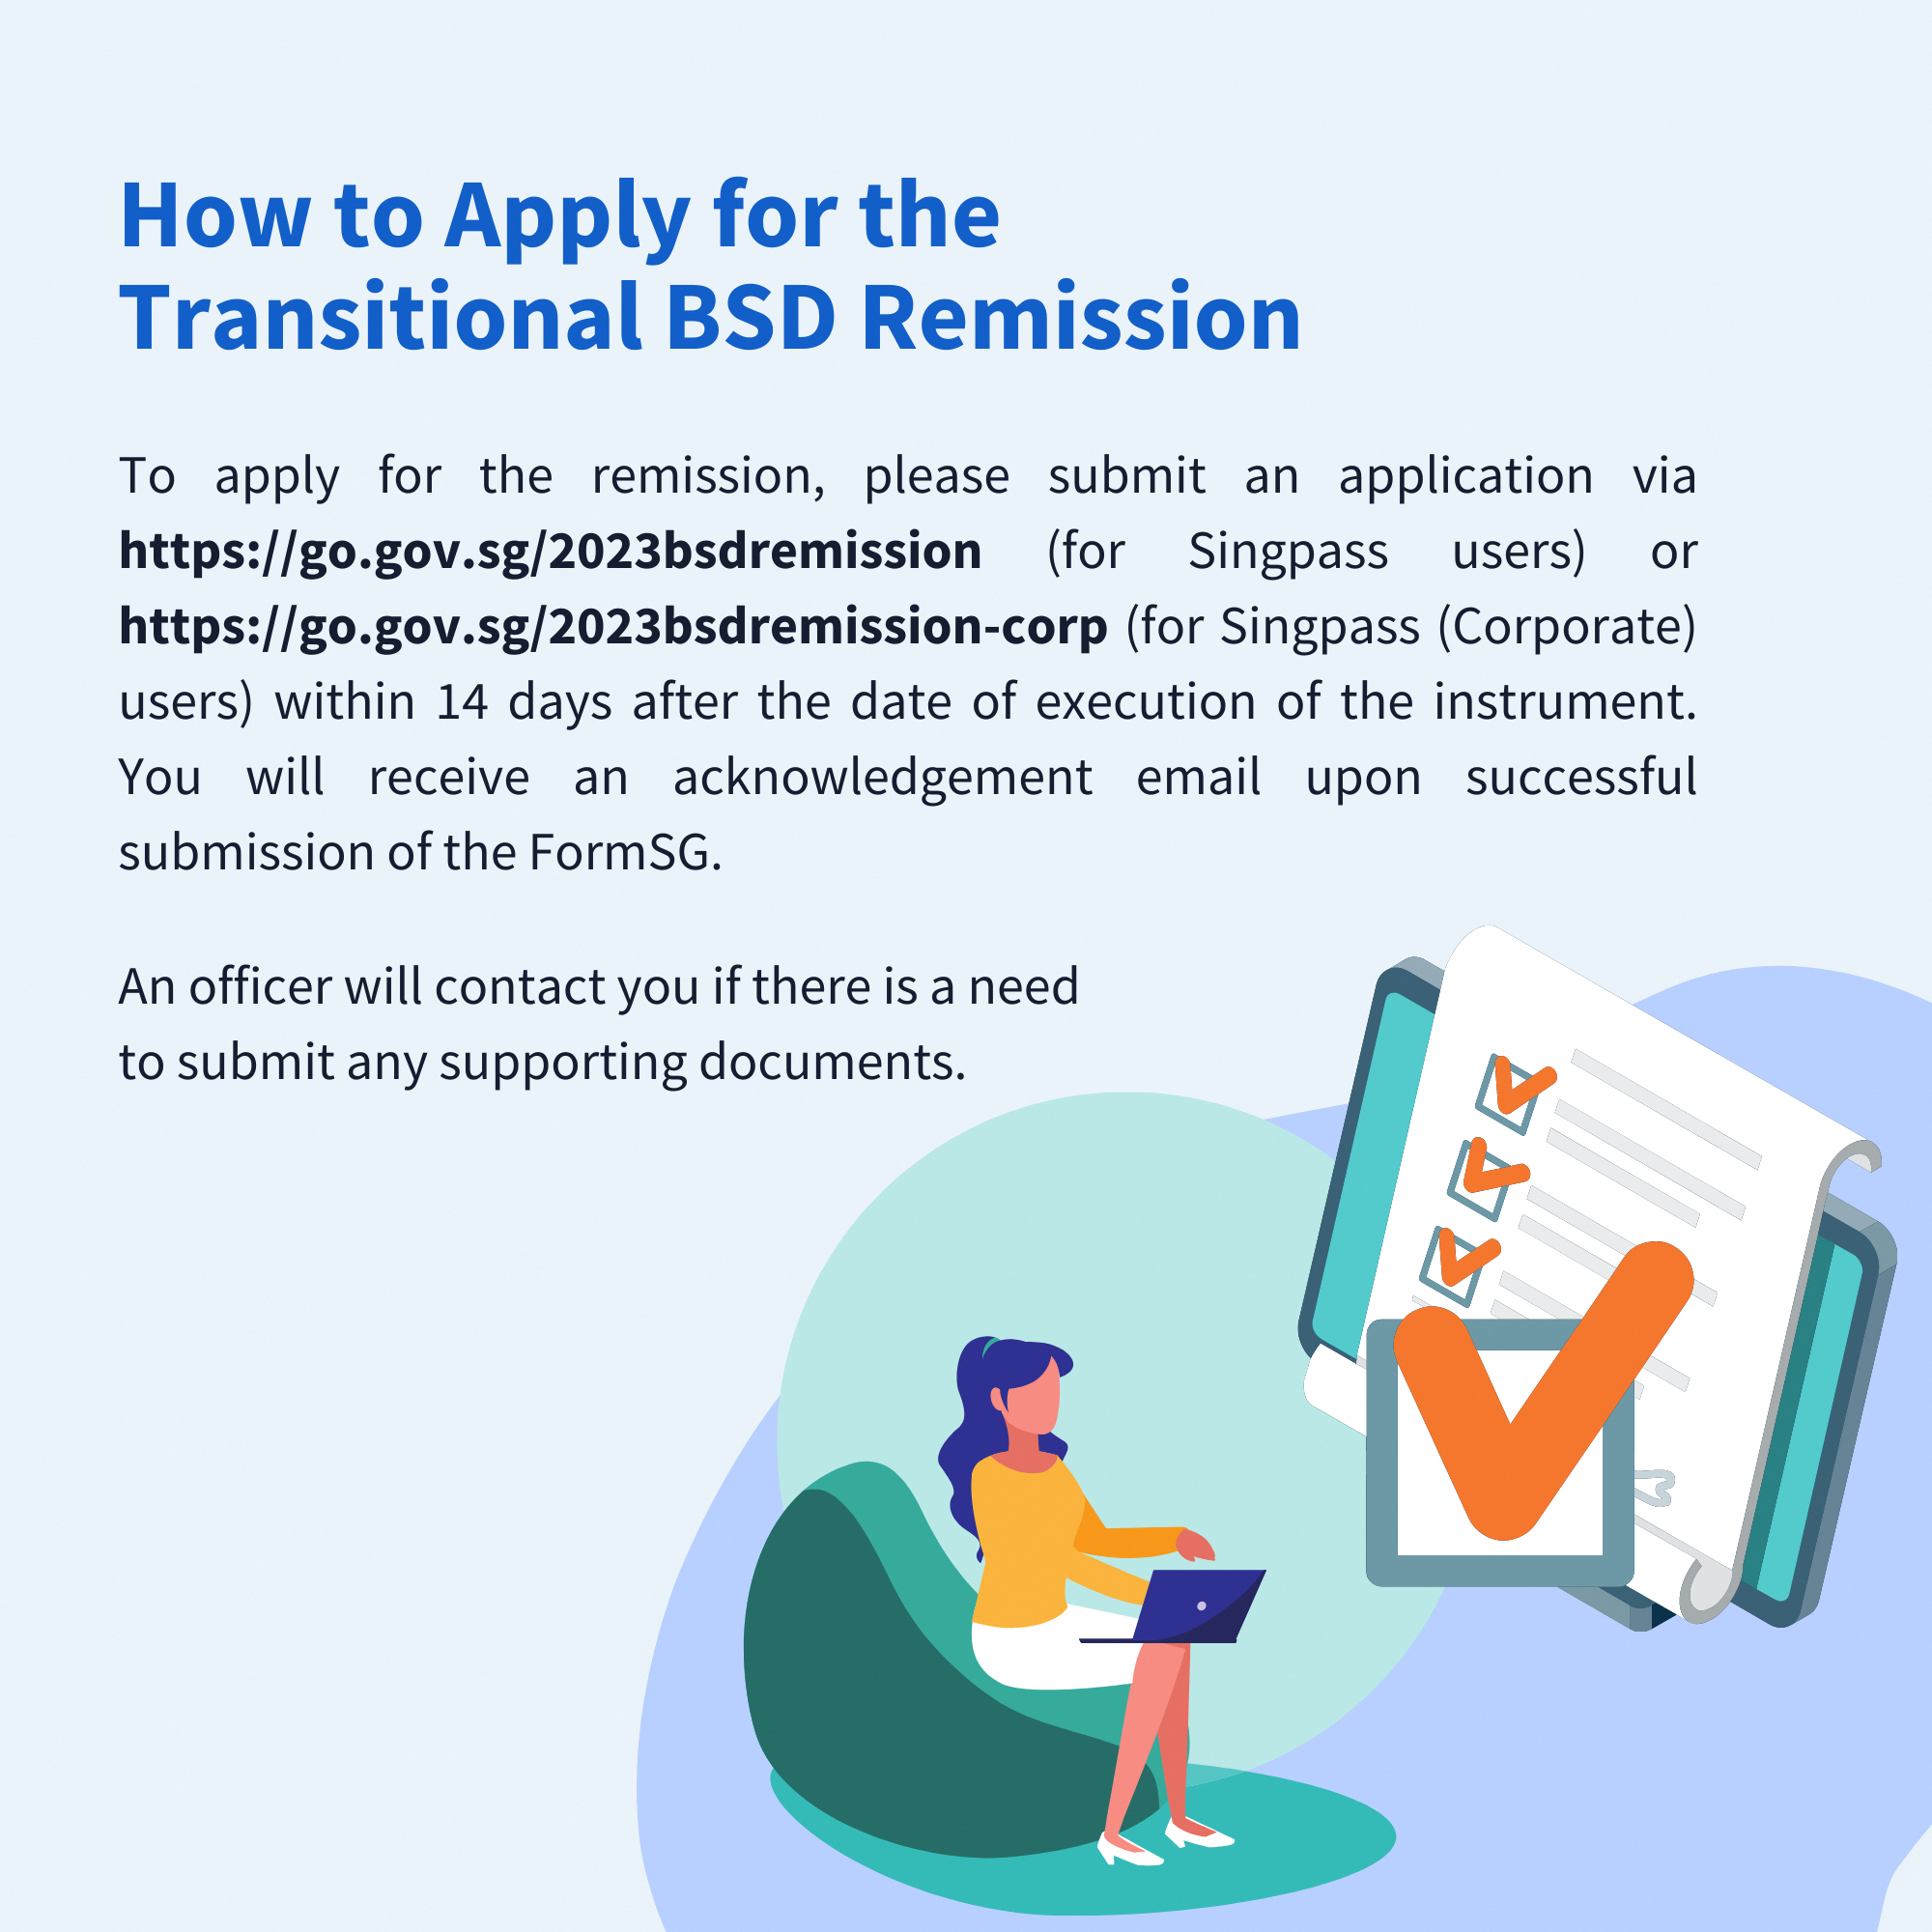 Please submit an application to IRAS on FormSG to apply for the transitional BSD remission.